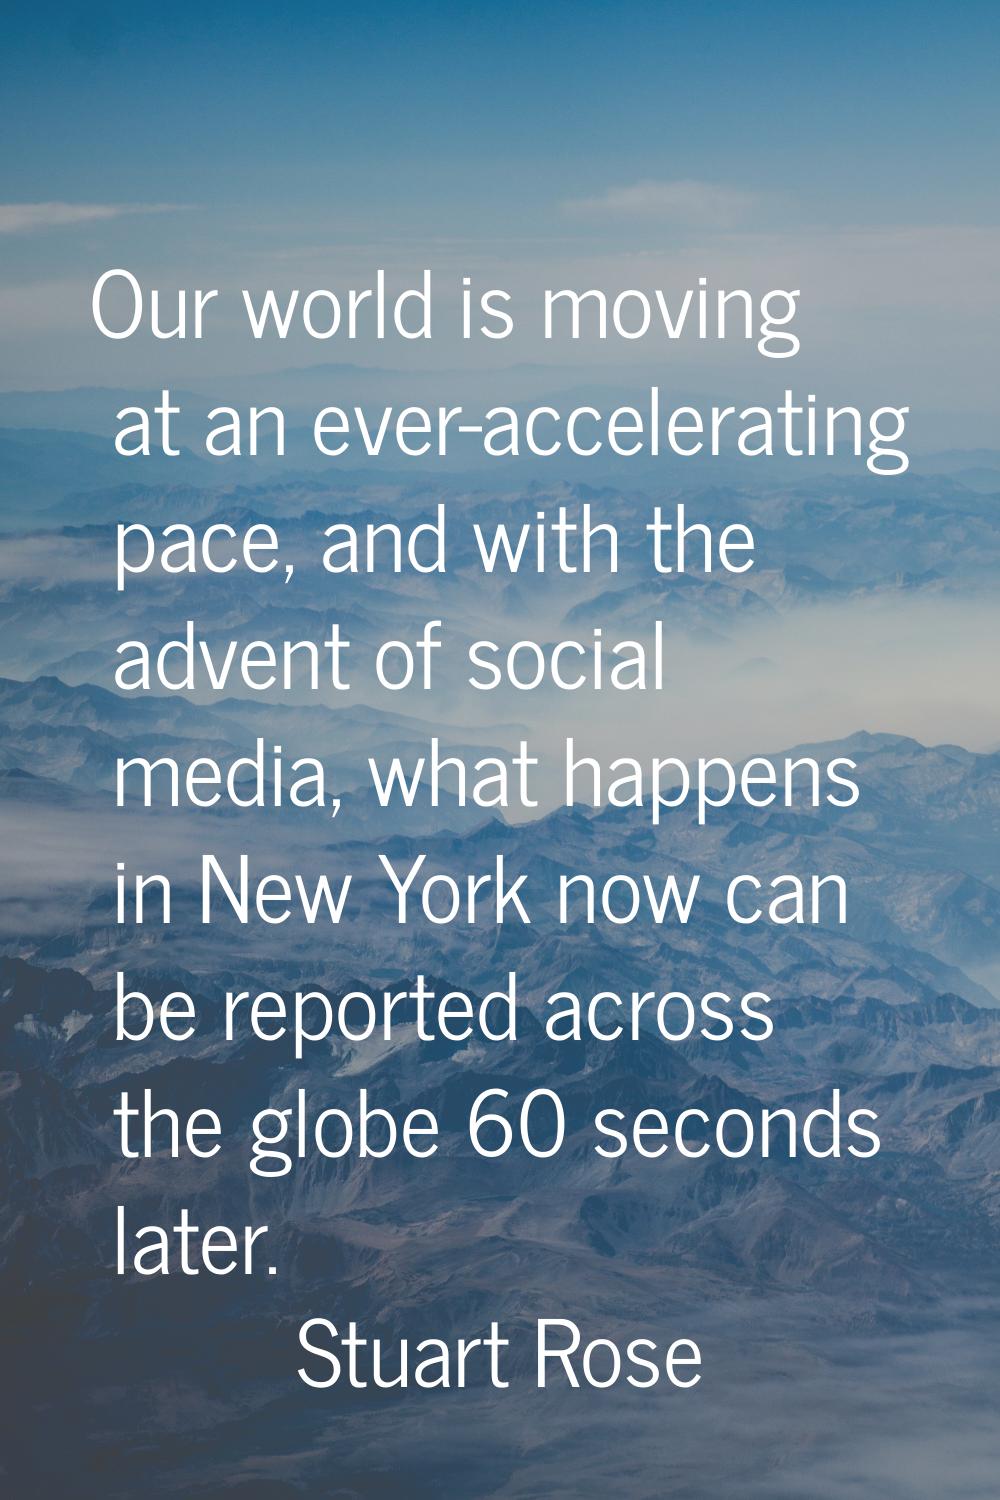 Our world is moving at an ever-accelerating pace, and with the advent of social media, what happens